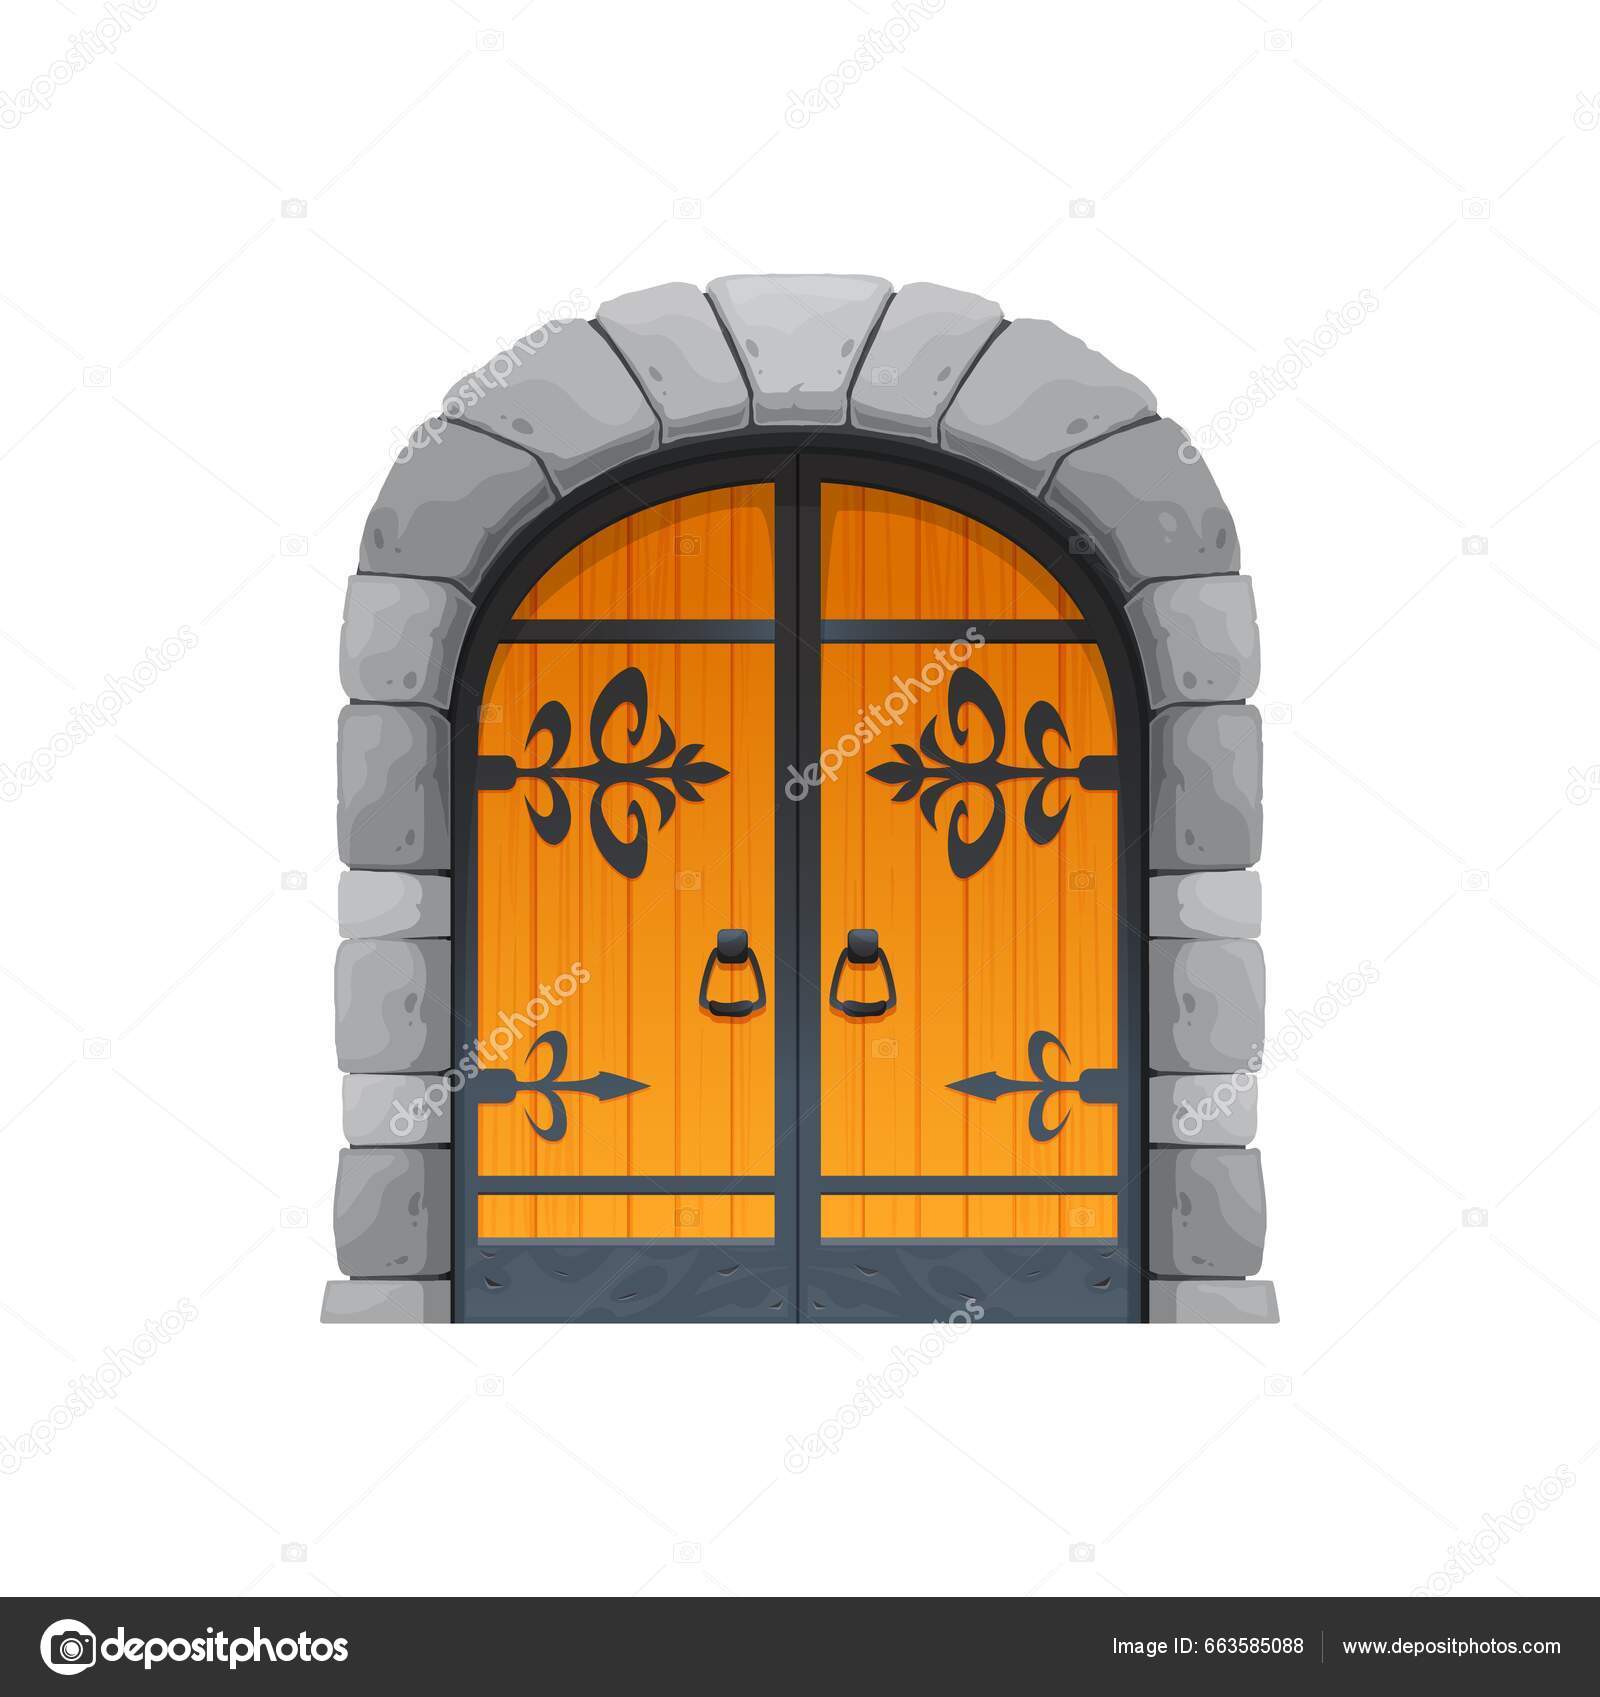 Fantasy medieval game assets Royalty Free Vector Image